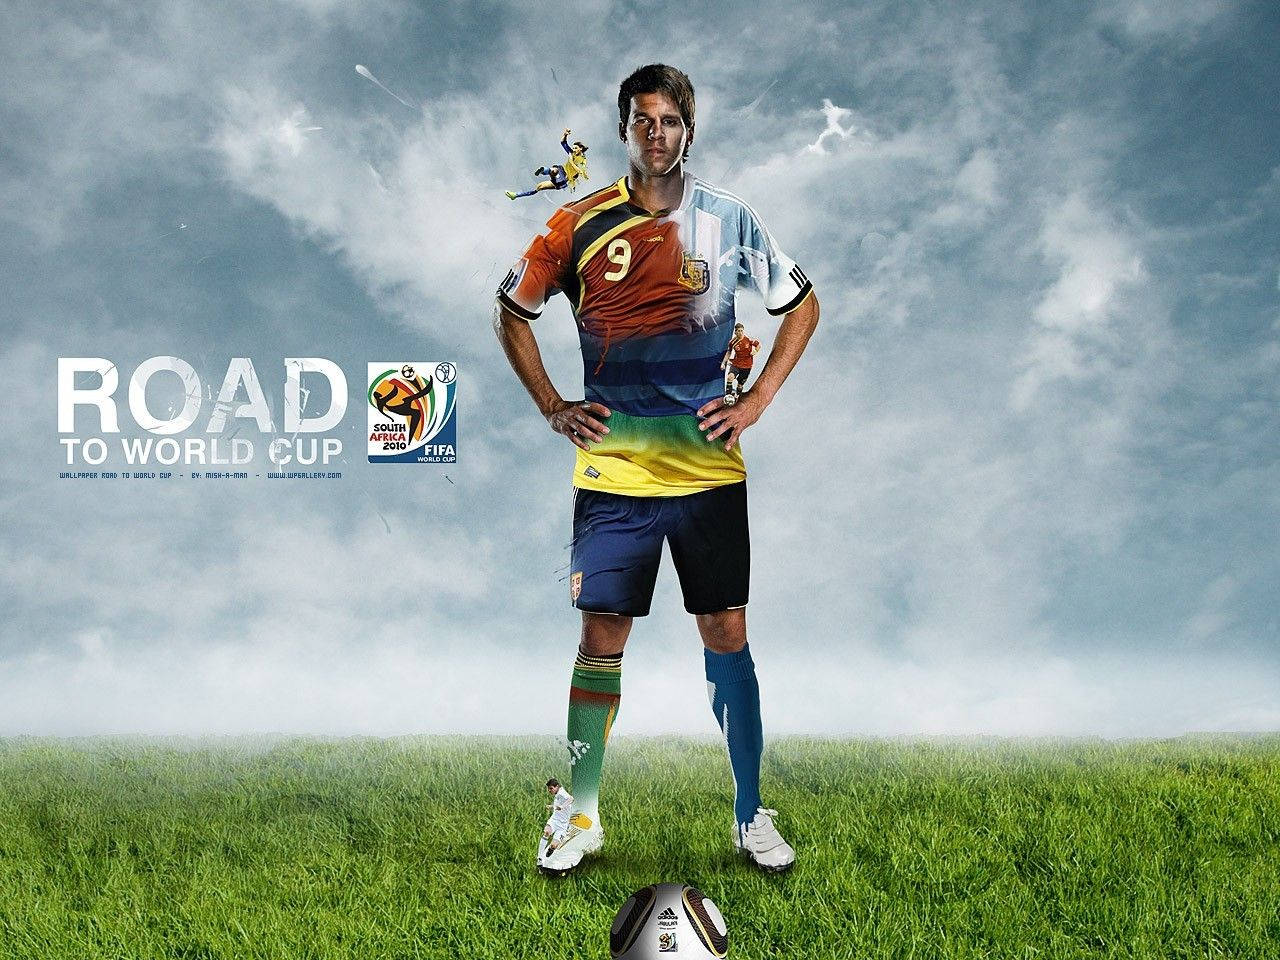 The beauty of the Soccer World Cup Wallpaper